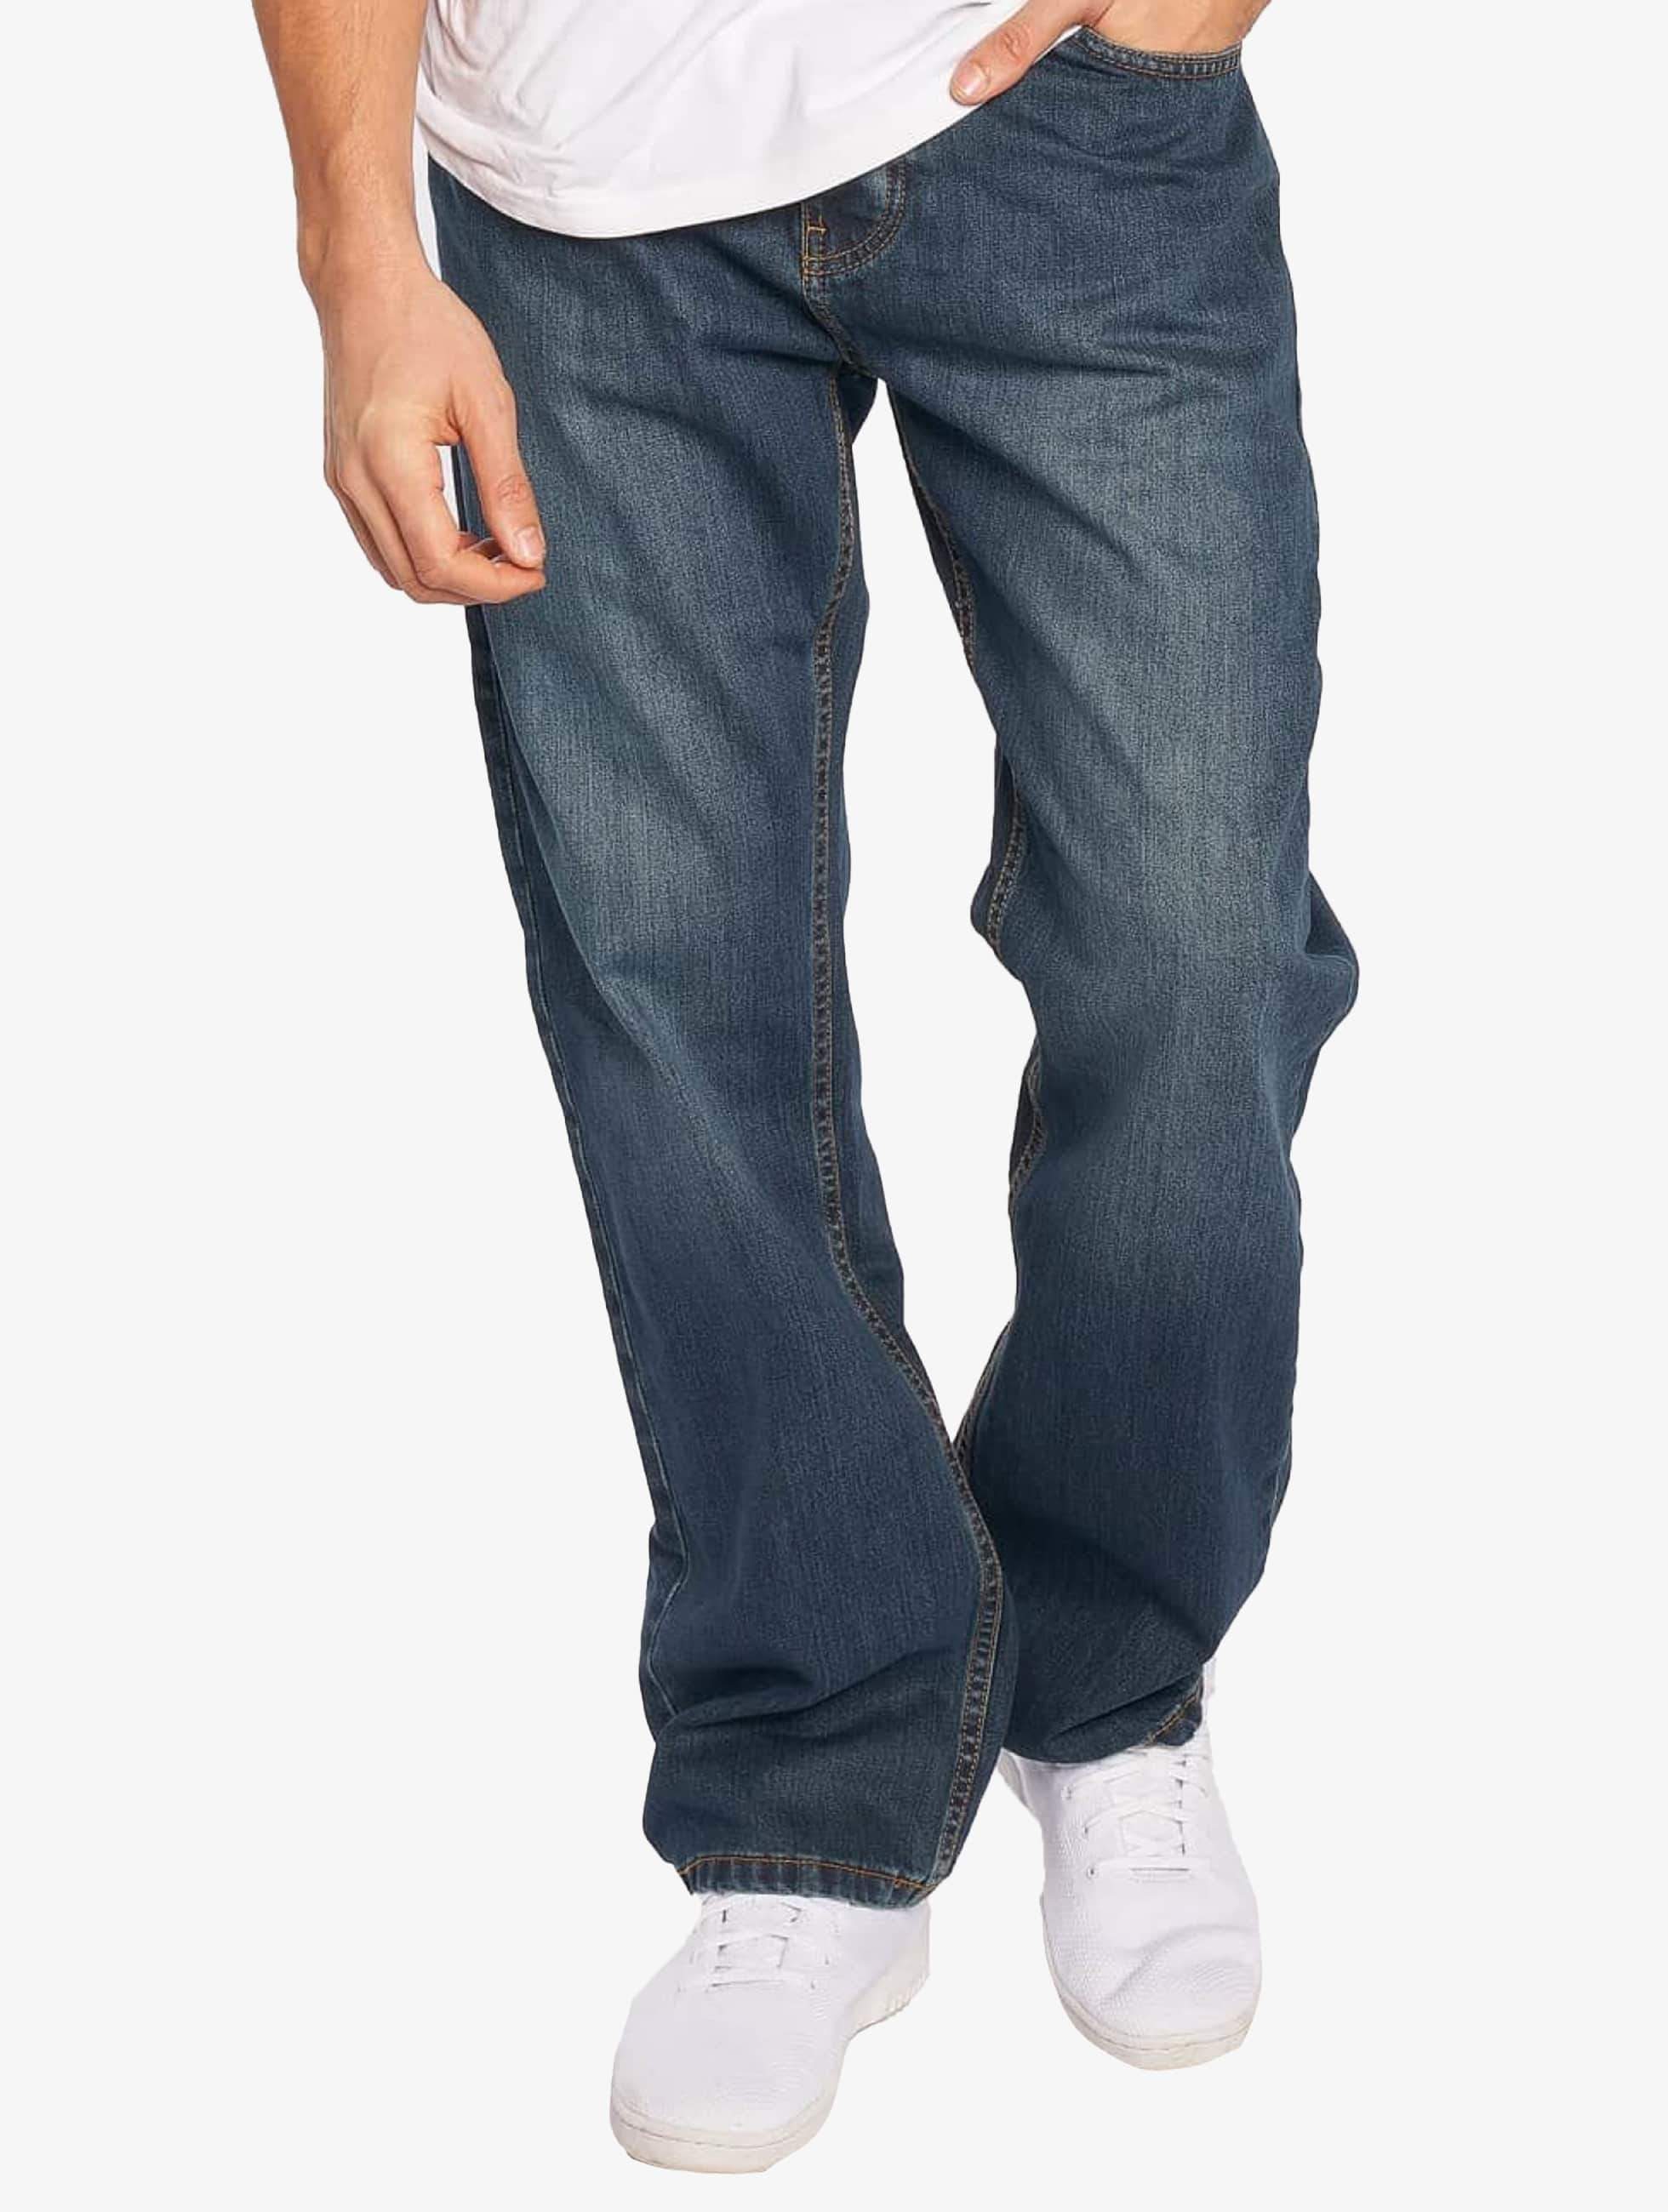 Neuf 50 in Taille Dickies Pensacola Antique Wash Jeans L34 W50 coupe ample mi environ 127.00 cm 